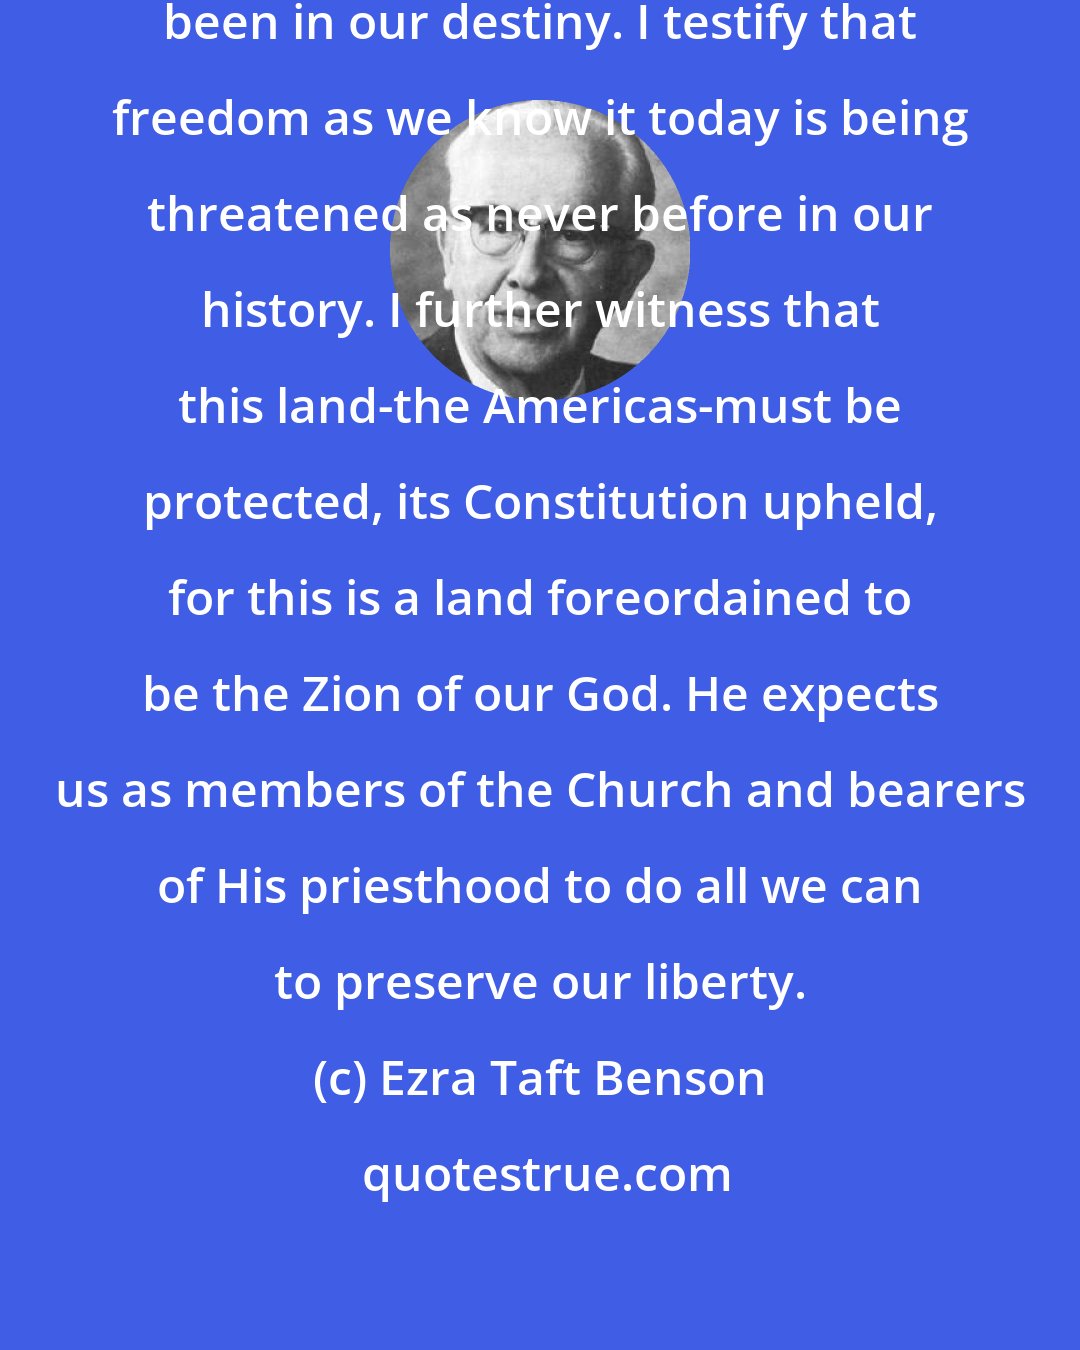 Ezra Taft Benson: I testify to you that God's hand has been in our destiny. I testify that freedom as we know it today is being threatened as never before in our history. I further witness that this land-the Americas-must be protected, its Constitution upheld, for this is a land foreordained to be the Zion of our God. He expects us as members of the Church and bearers of His priesthood to do all we can to preserve our liberty.